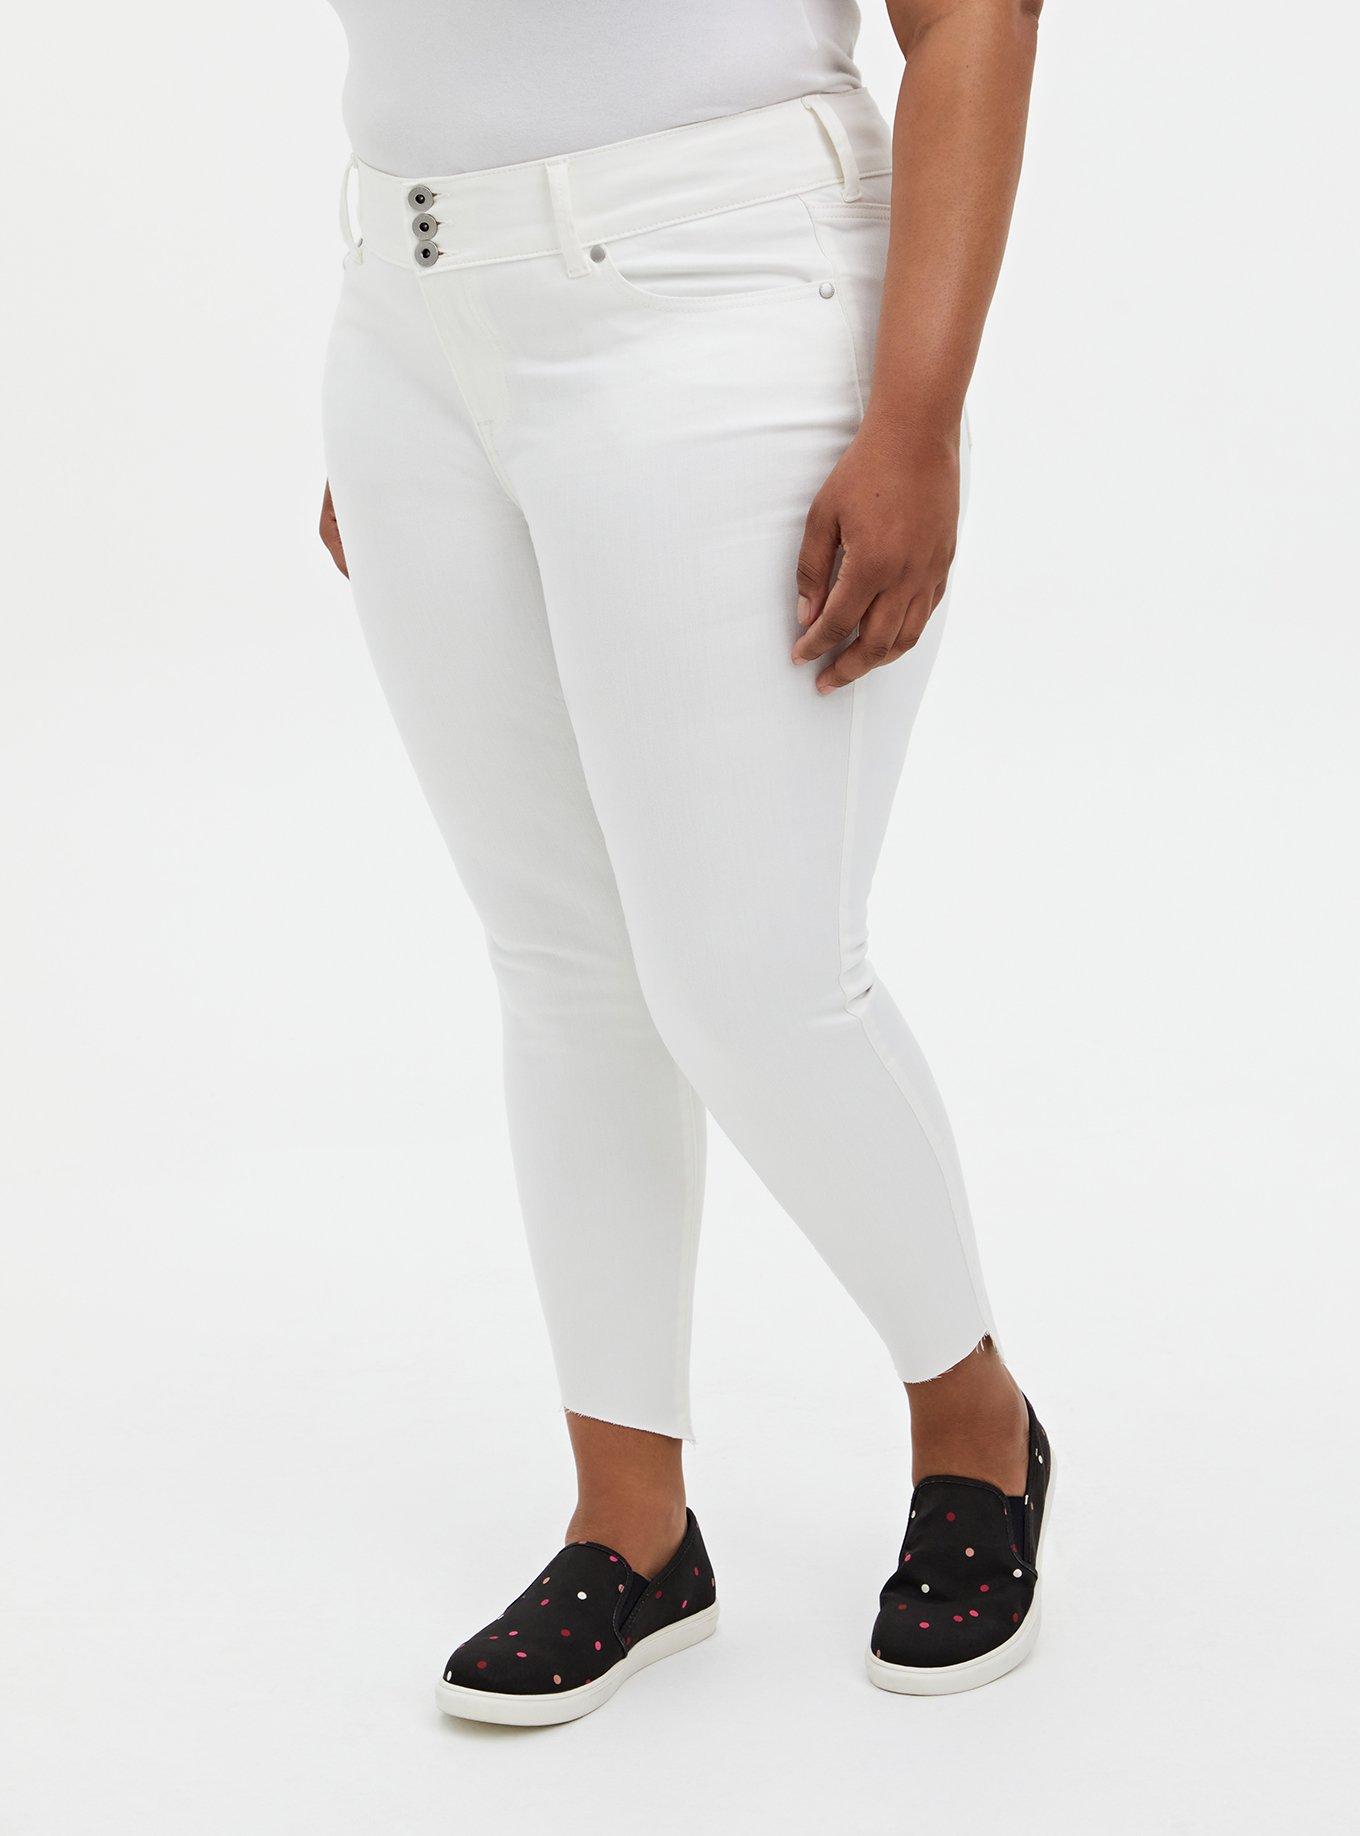 Jeans & Trousers, Rio High Rise Jeggings(Women's)